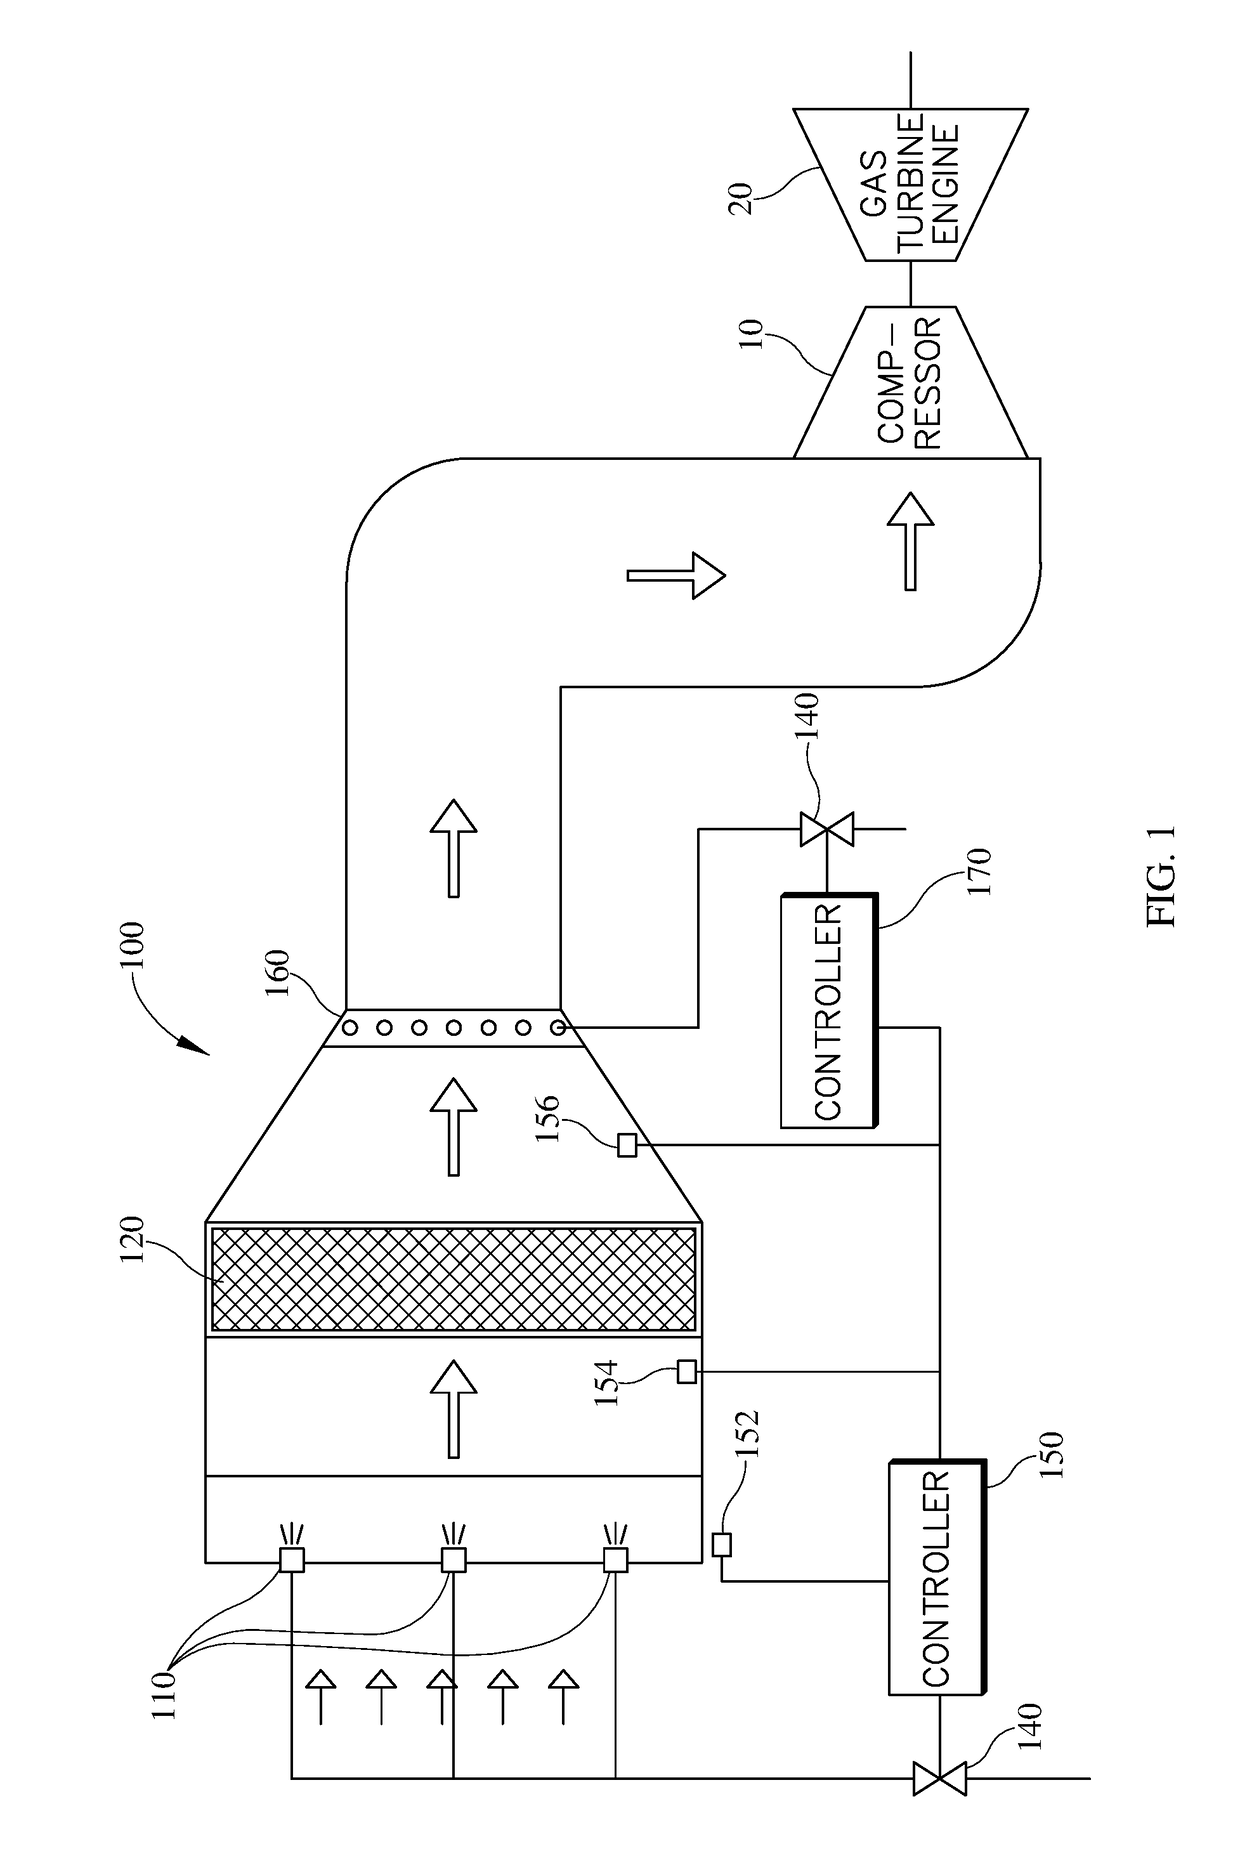 Method of running an air inlet system